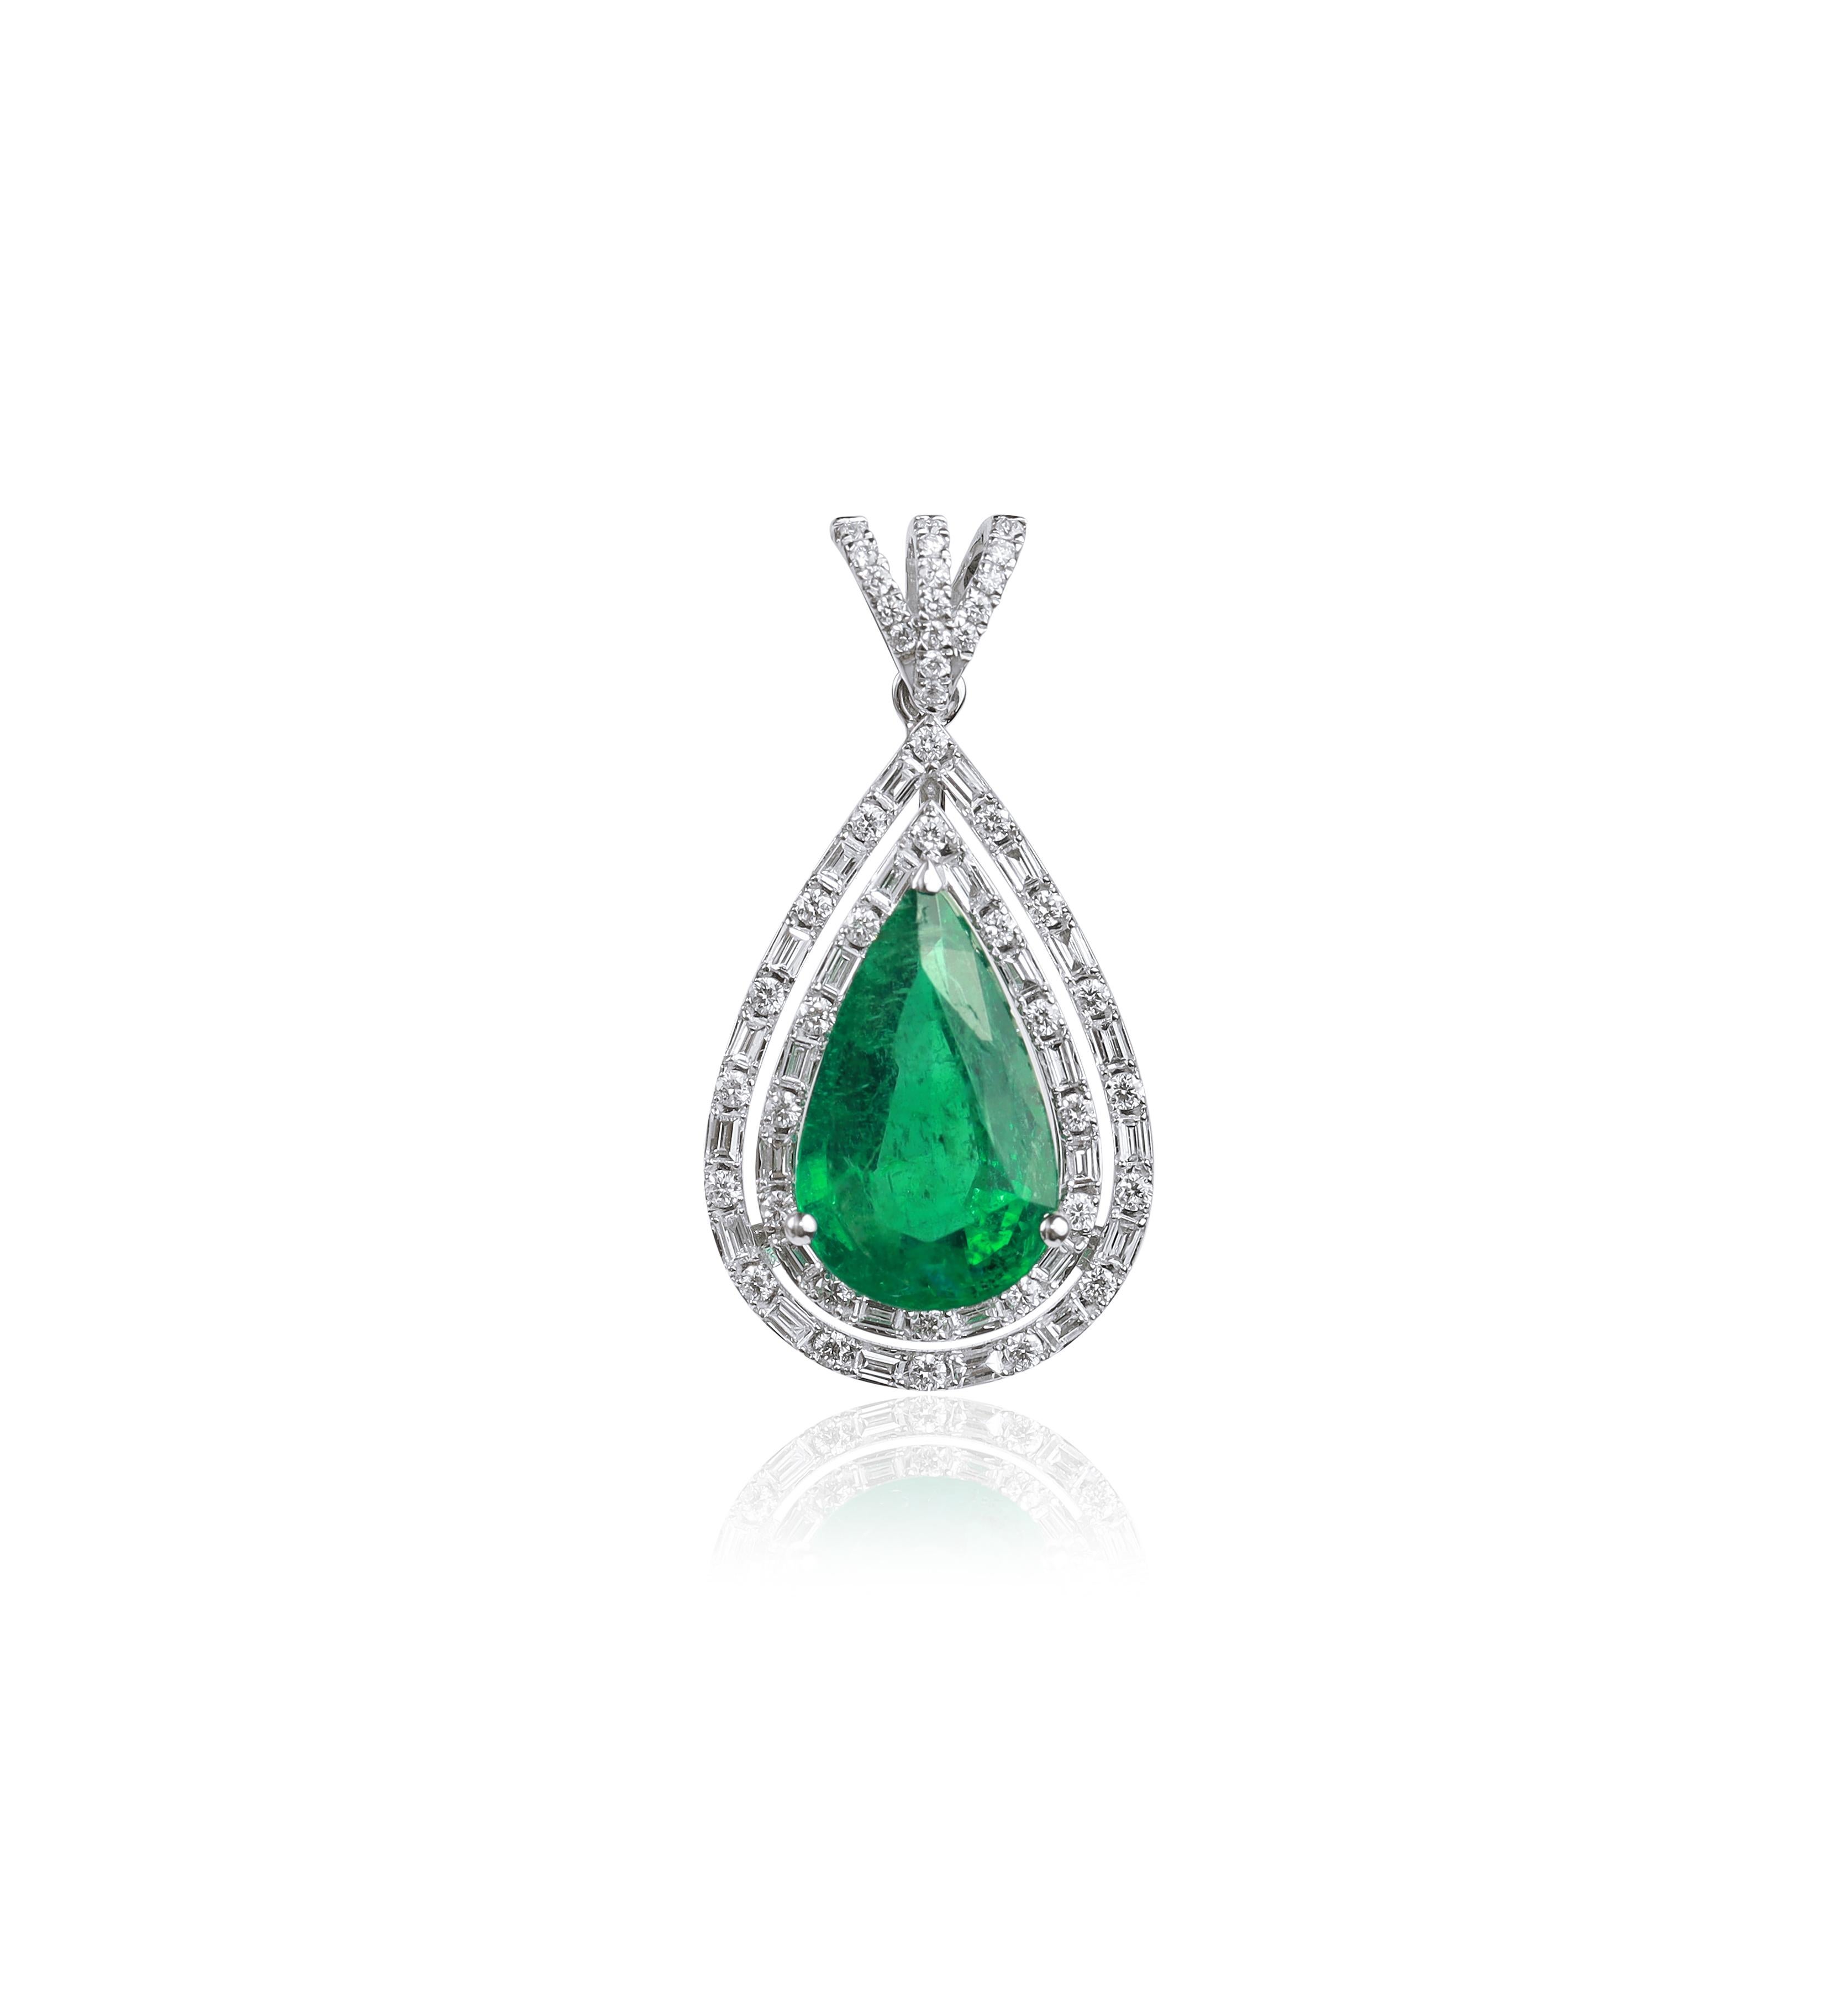 Pear Natural Emerald Diamond Double Halo Pendant 18k White Gold, Gift for her

Available in 18k white gold.

Same design can be made also with other custom gemstones per request.

Product details:

- Solid gold

- Diamond - approx. 0.64carat

-